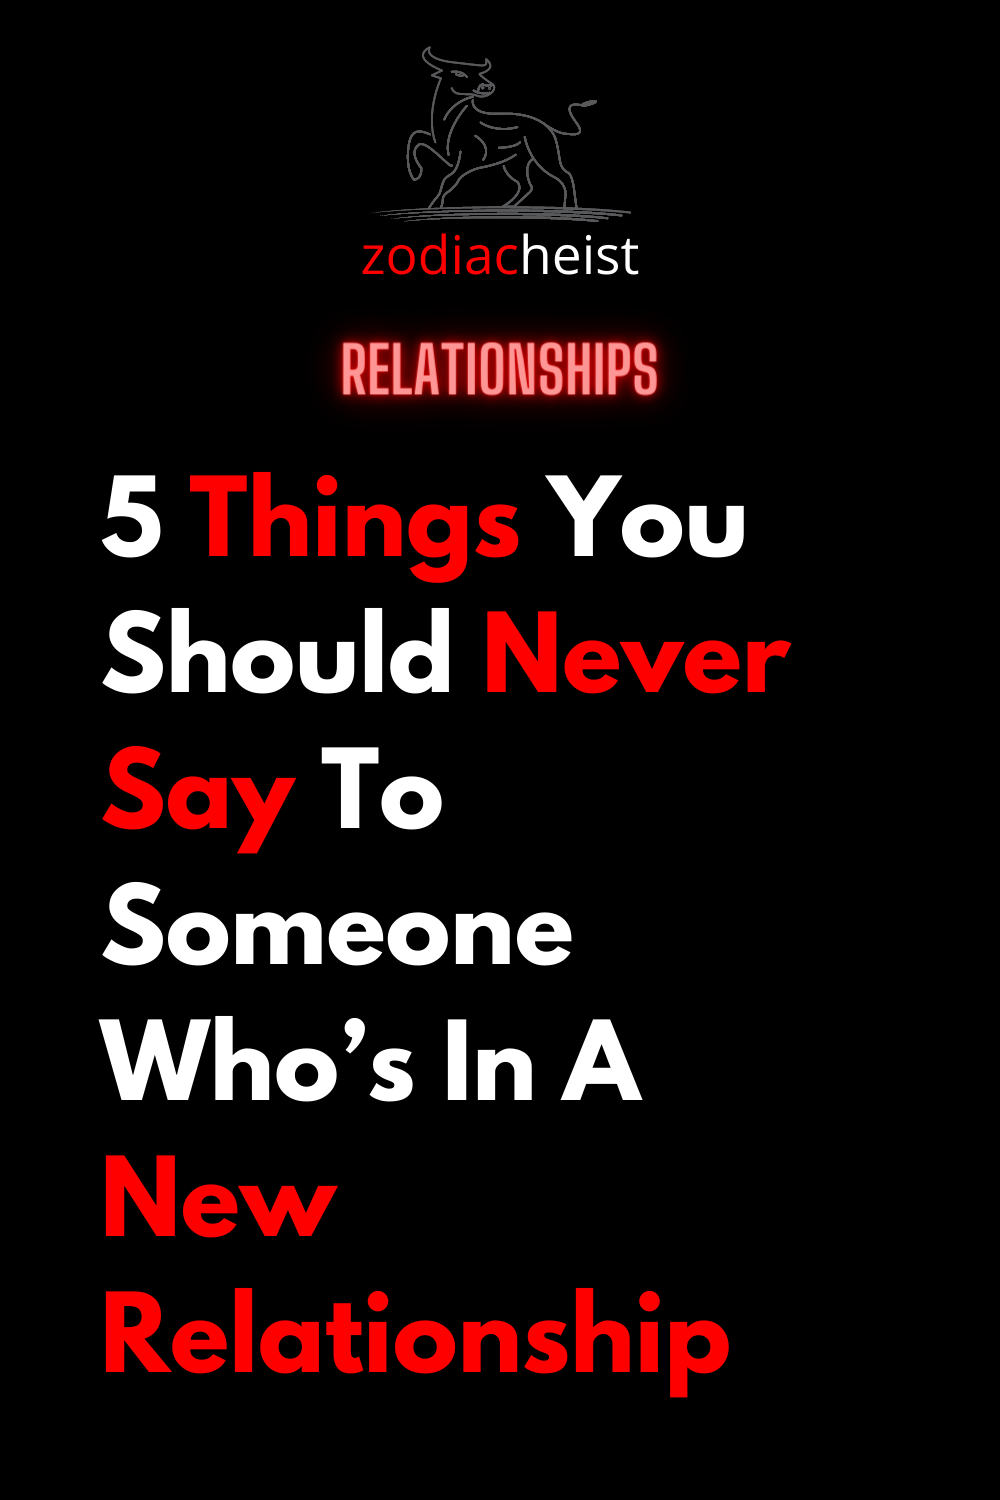 5 Things You Should Never Say To Someone Who’s In A New Relationship